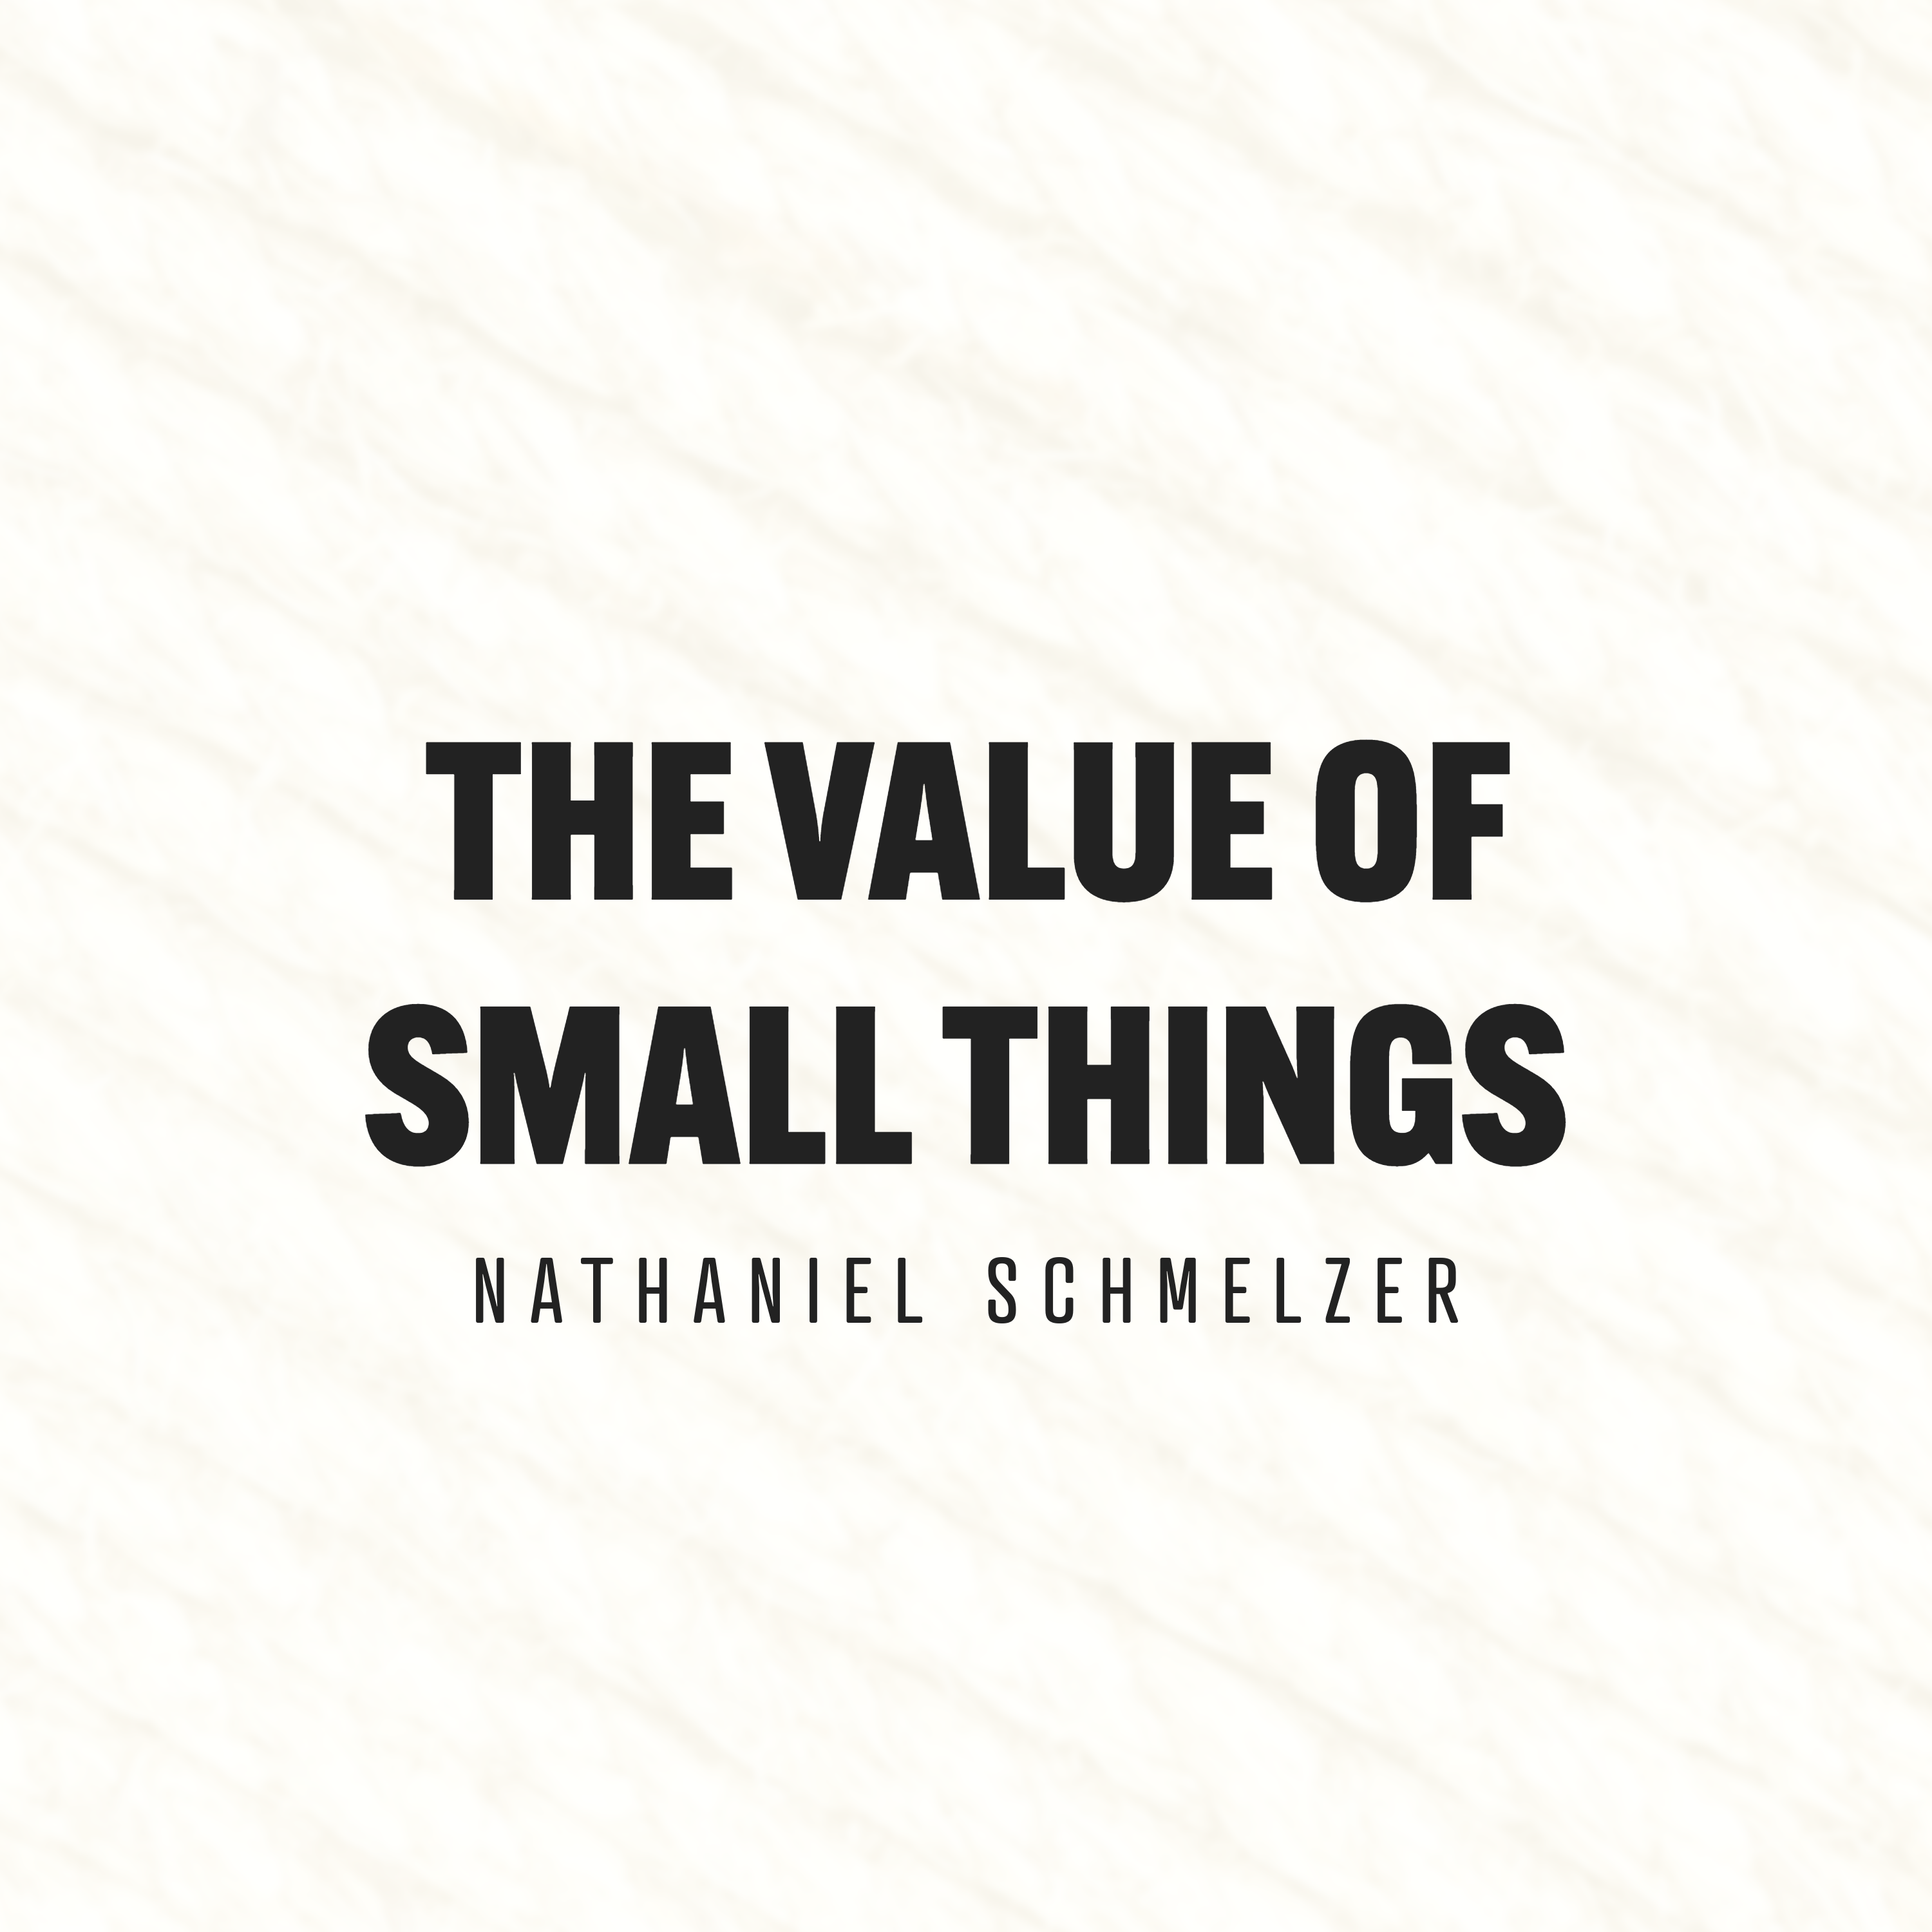 The Value of Small Things